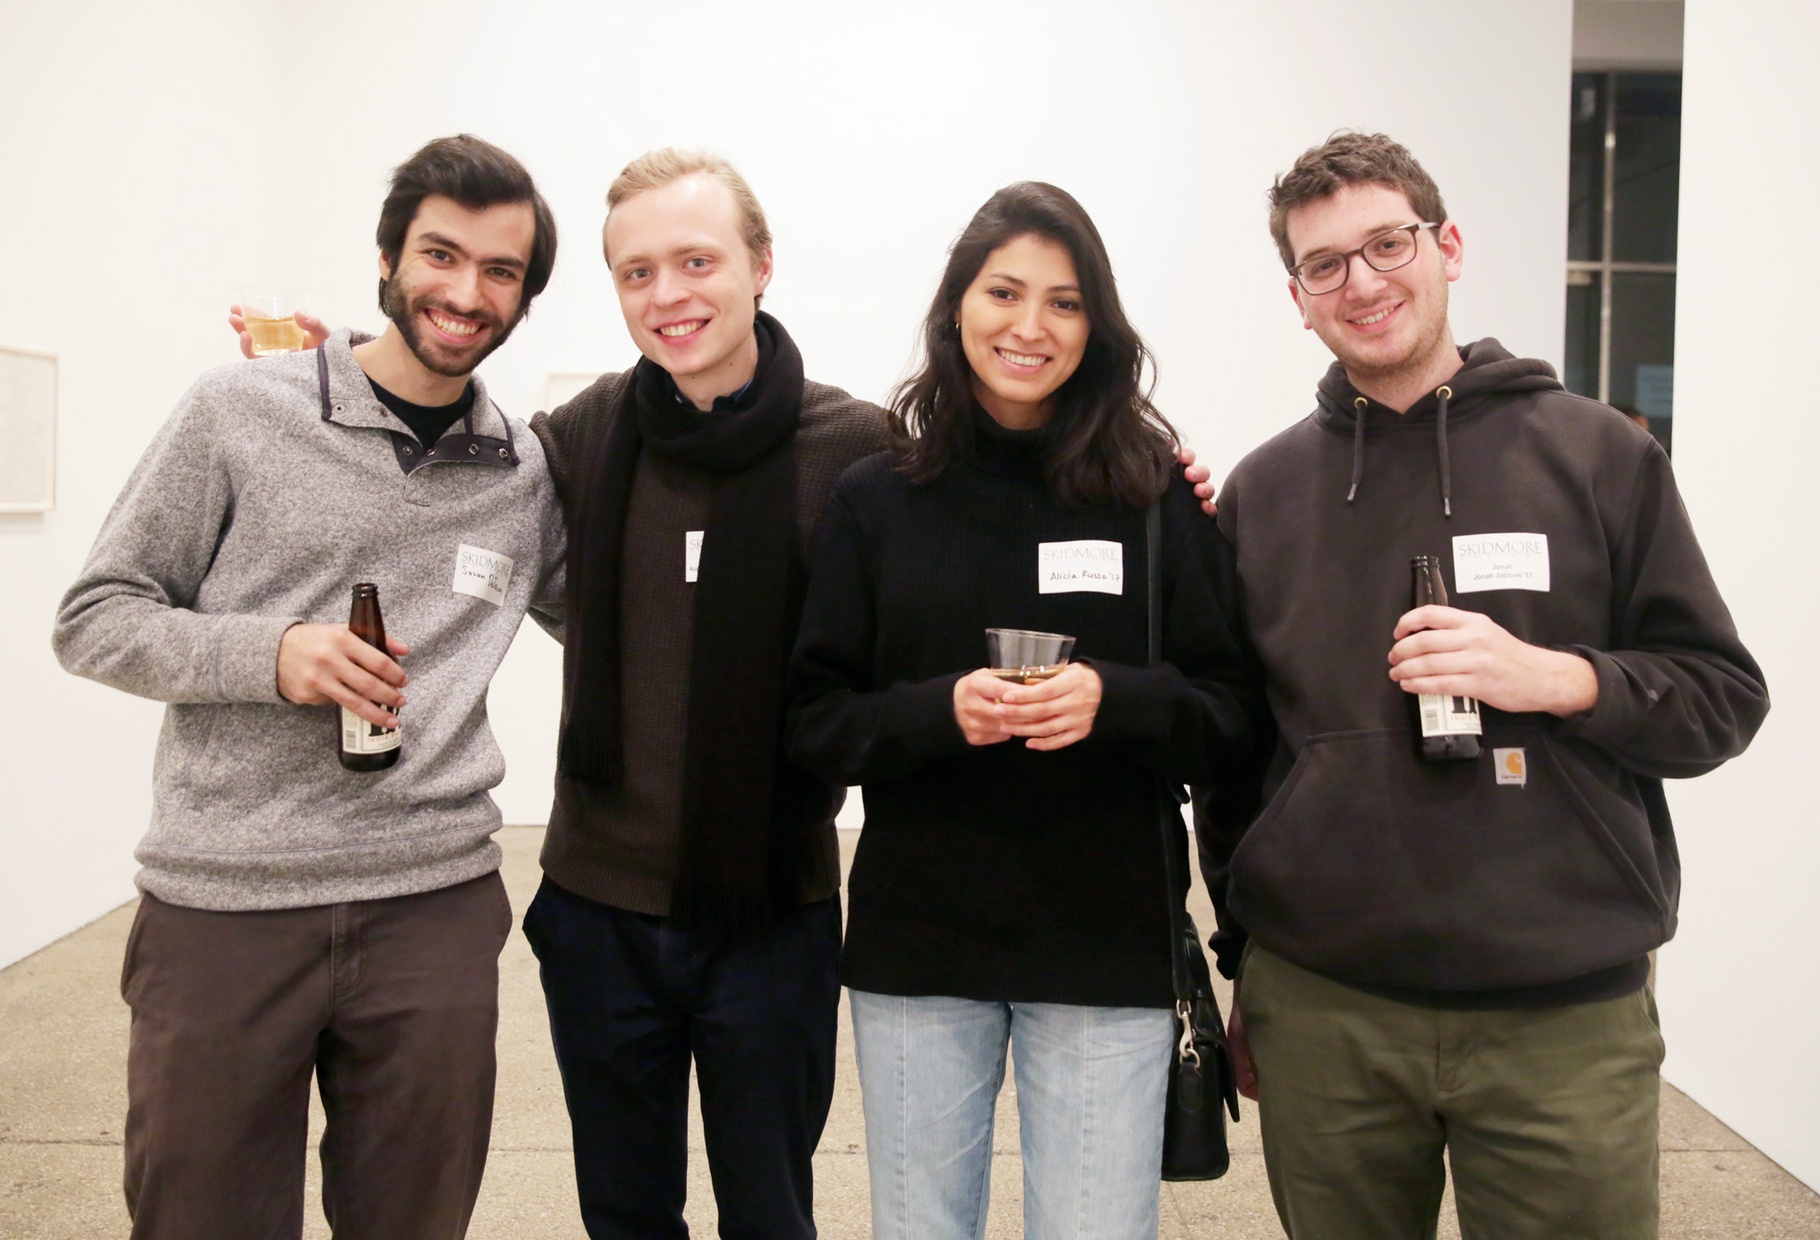 Four, young, light-skinned people stand next to each other smiling, holding drinks in front of a white wall.